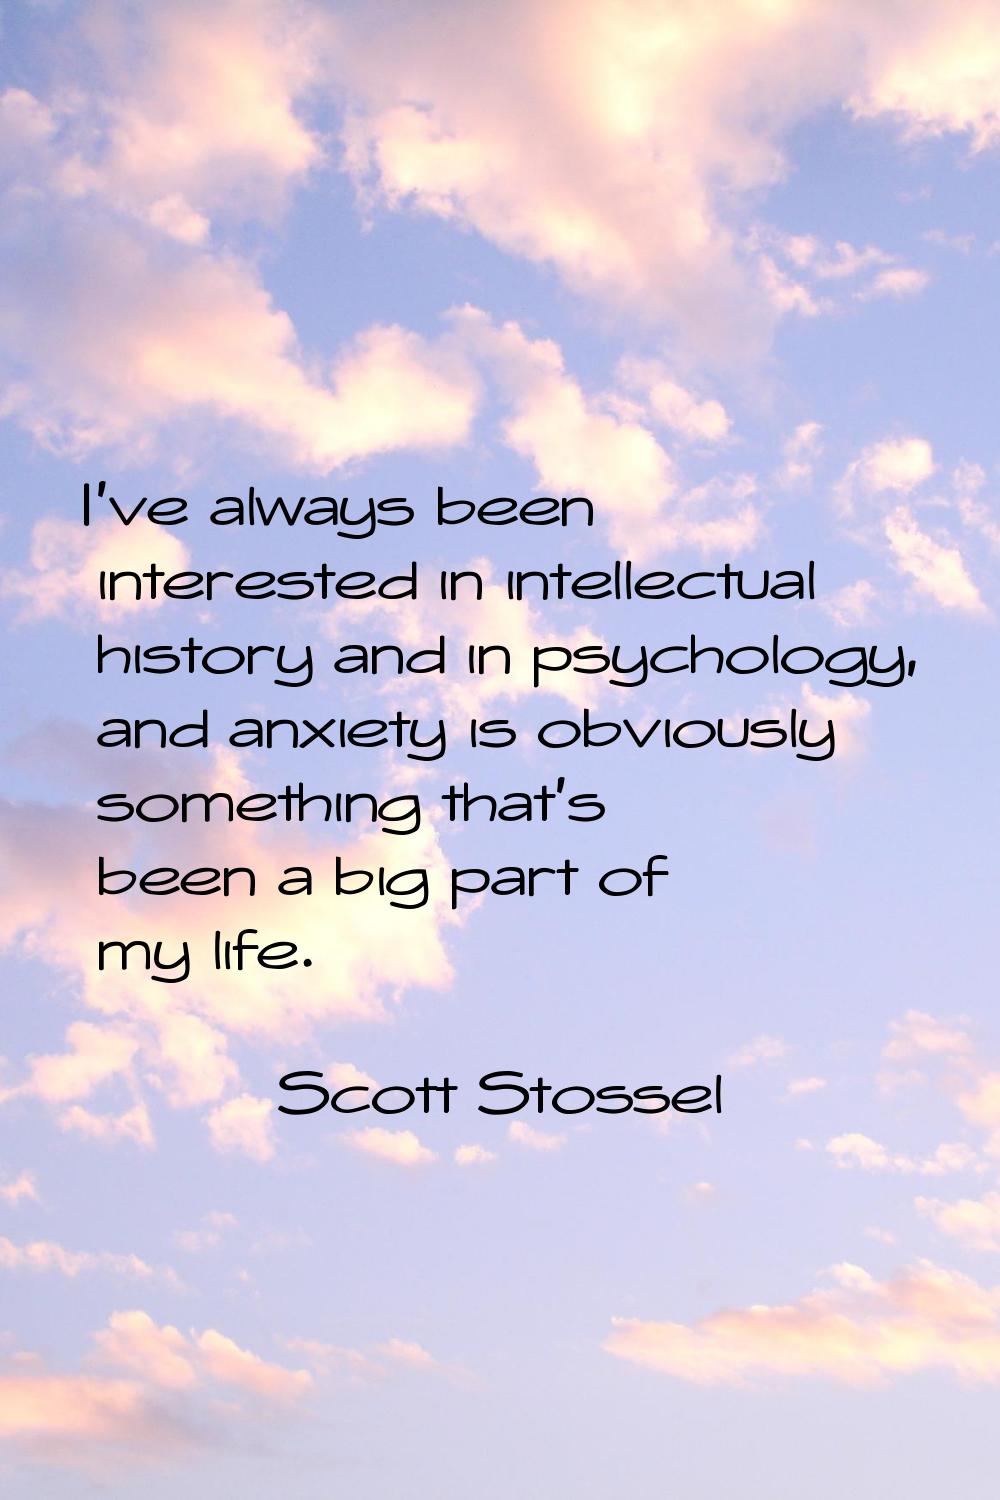 I've always been interested in intellectual history and in psychology, and anxiety is obviously som